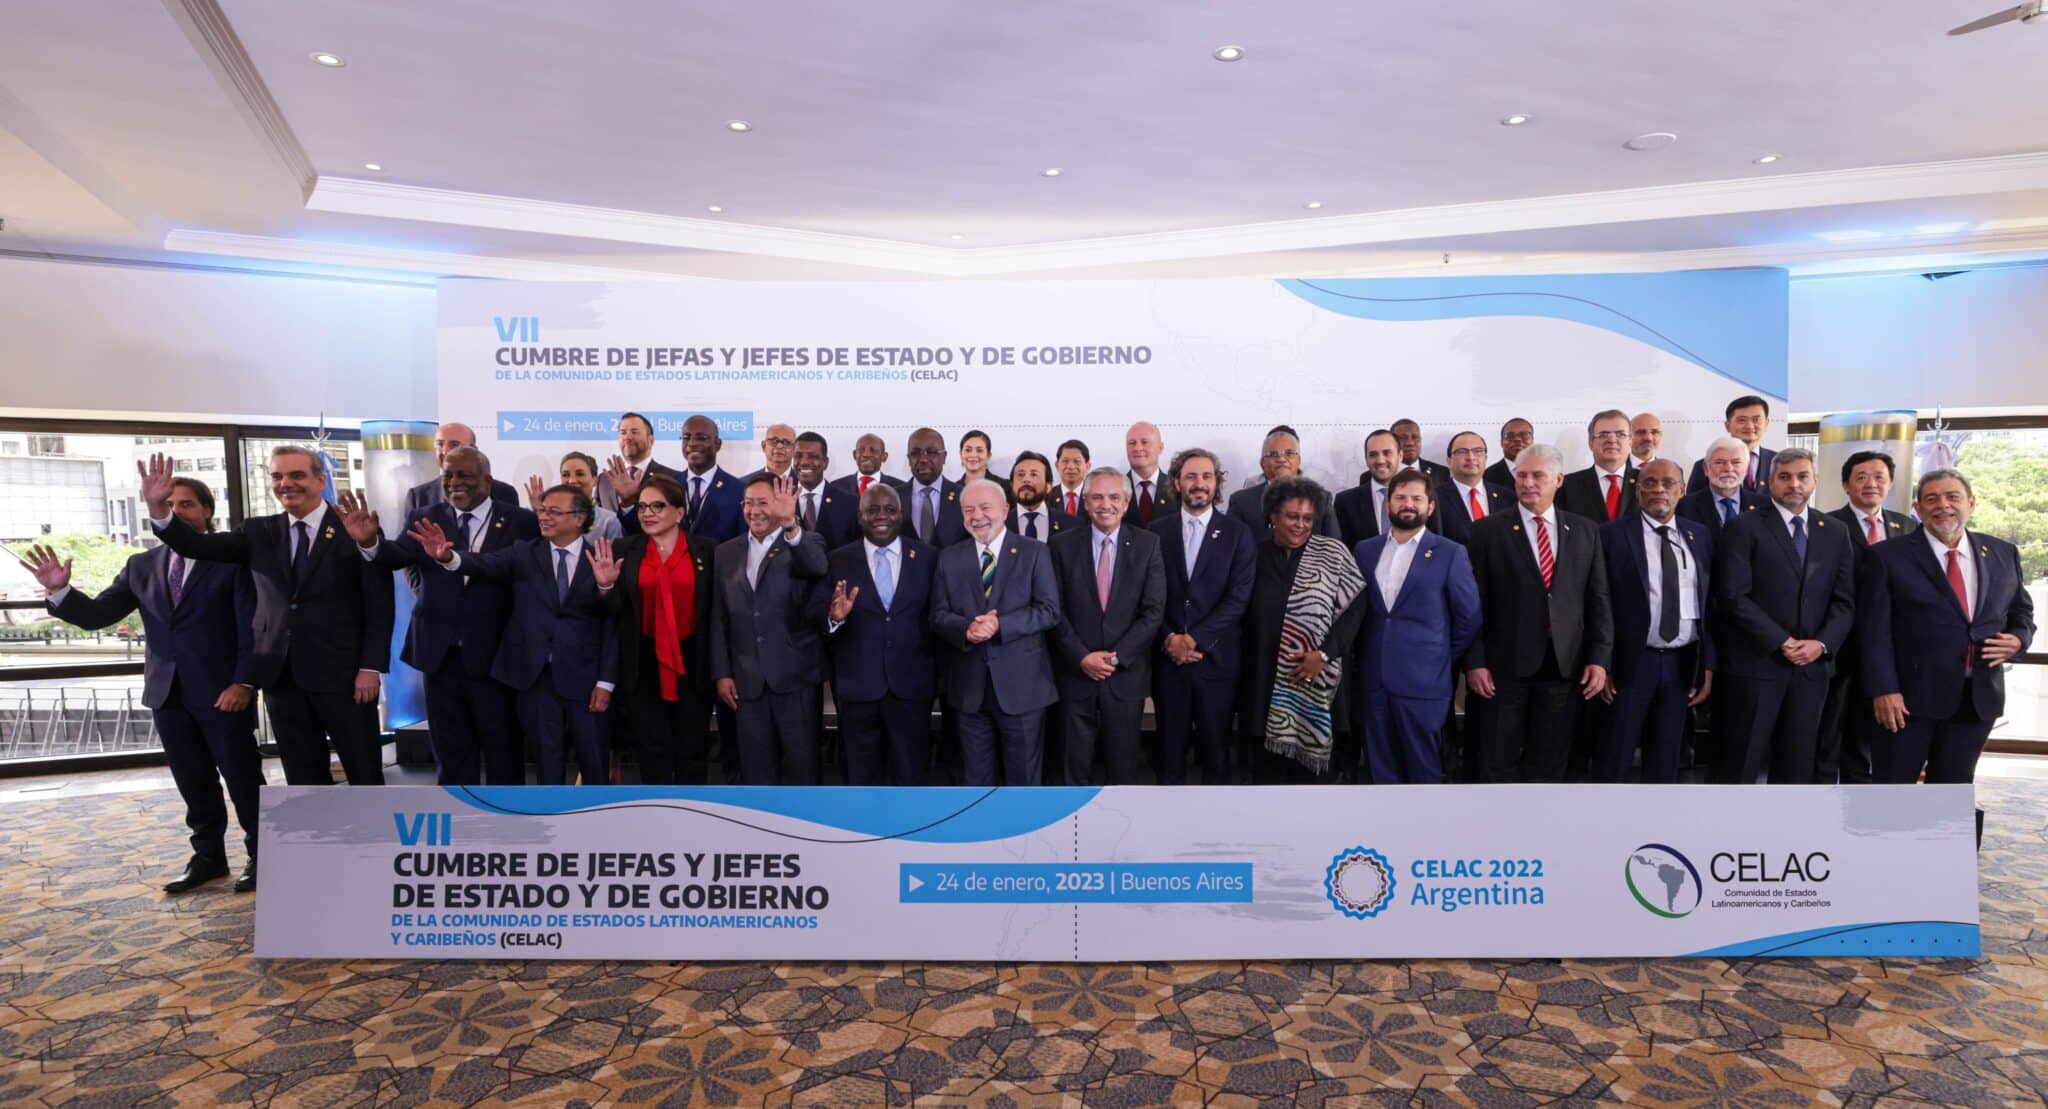 The VII Summit of the Heads of State of Community of Latin American and Caribbean States (CELAC). Photo: Twitter/@Portavoz_Ar.